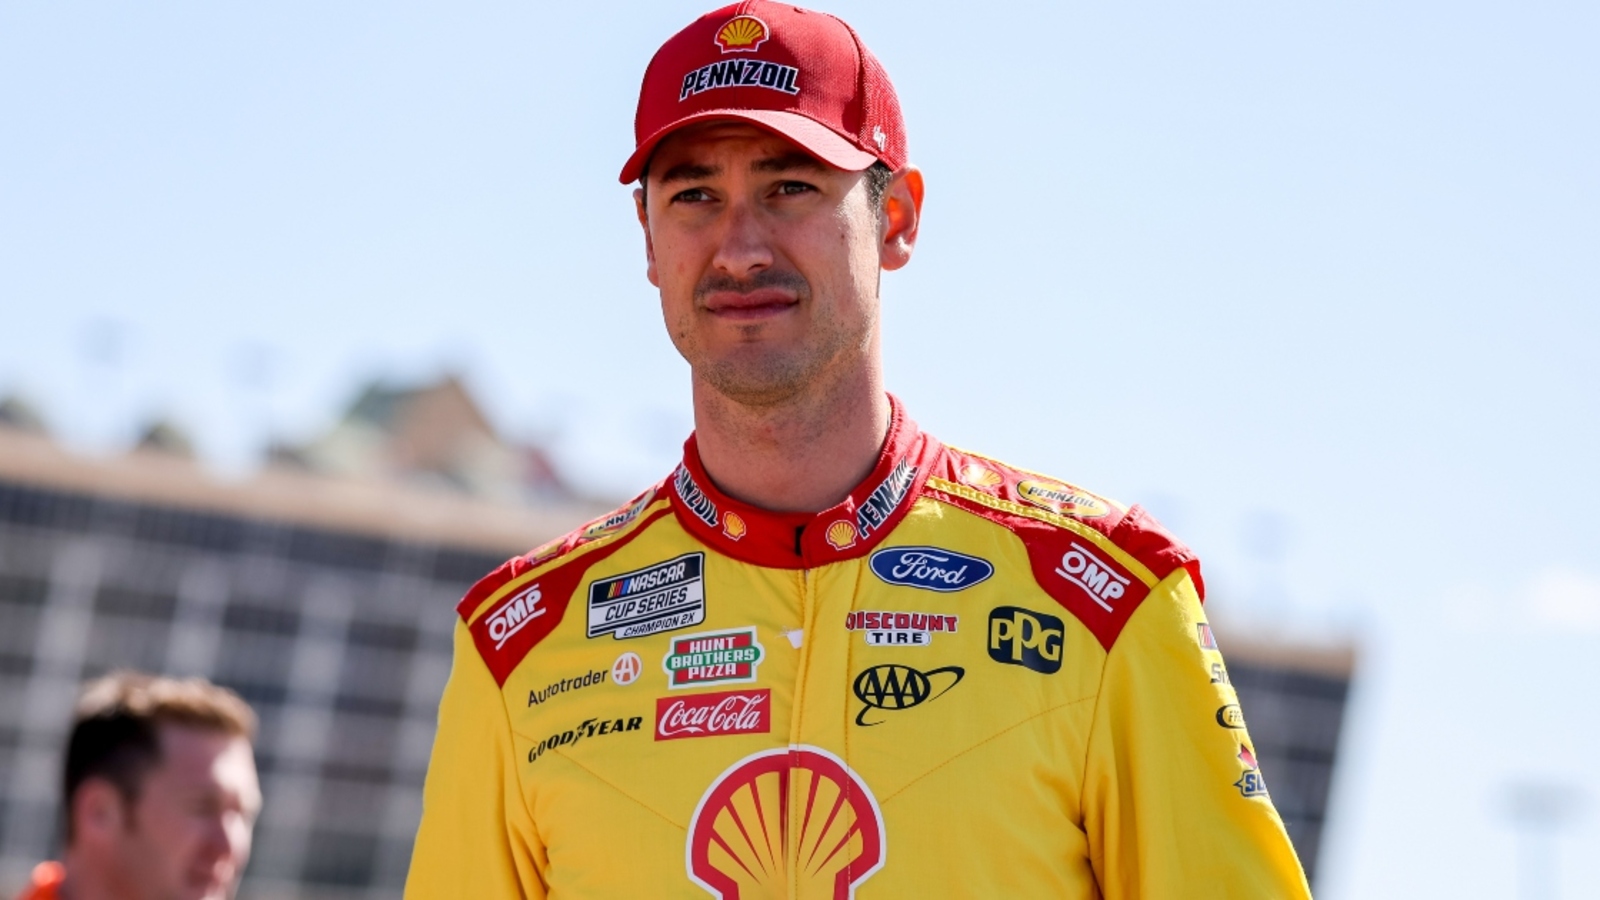 Joey Logano weighs in on track limit debate: ‘We have monster trucks compared to an F1 car’